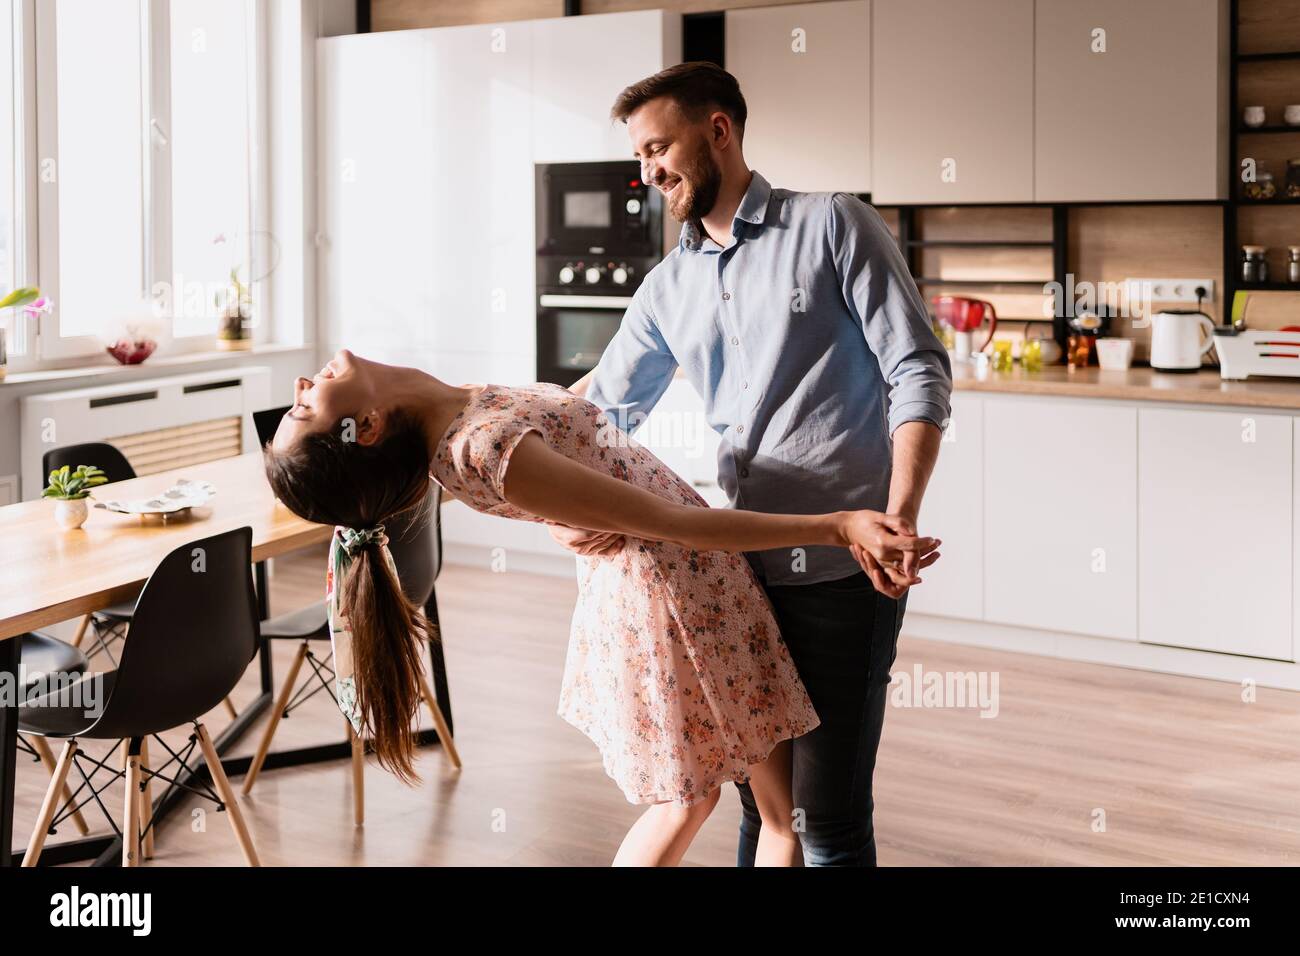 Happy young couple dancing at home in the modern living, Best weekend activities for lovers Stock Photo